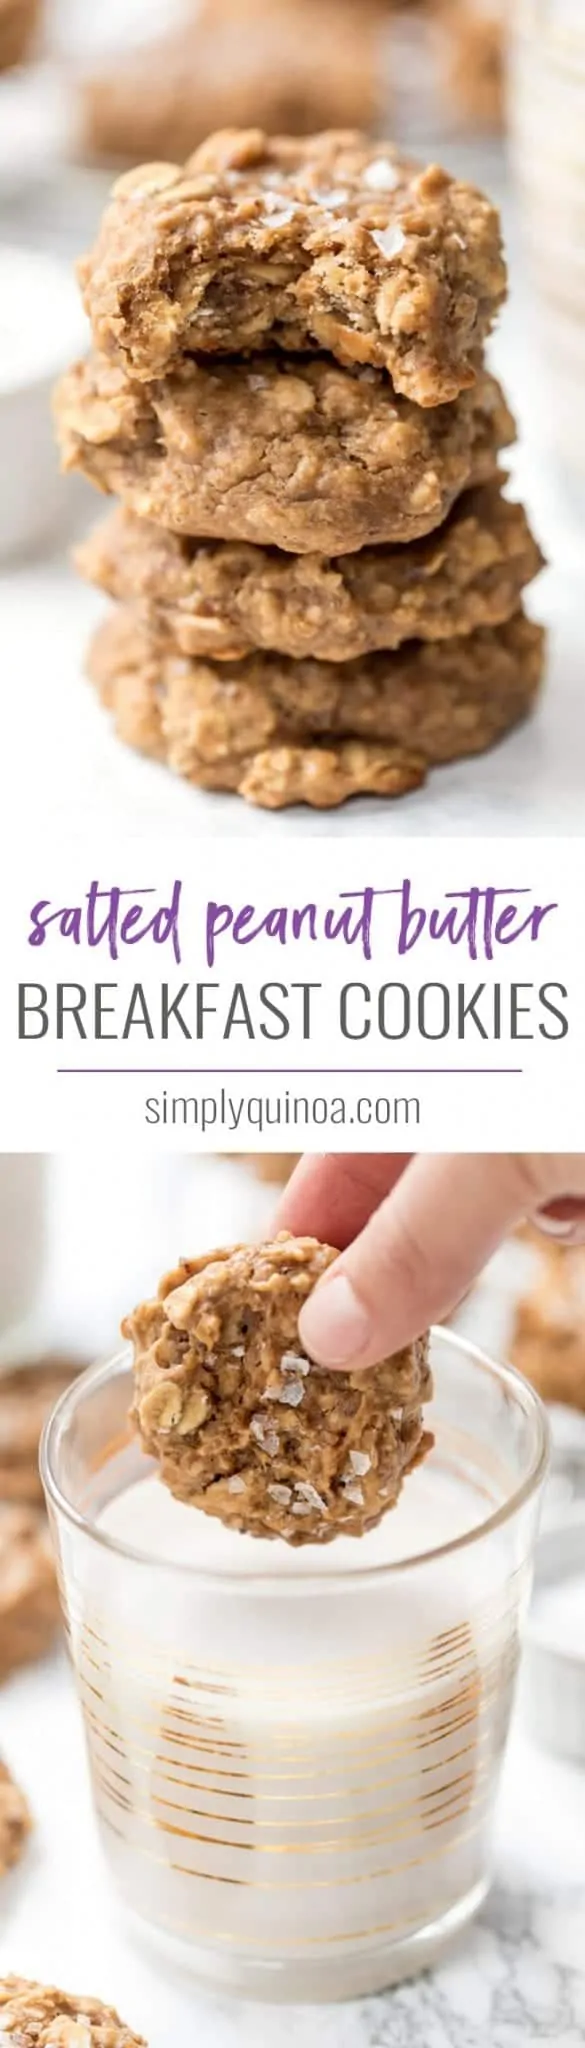 healthy peanut butter breakfast cookies with flaked sea salt on top